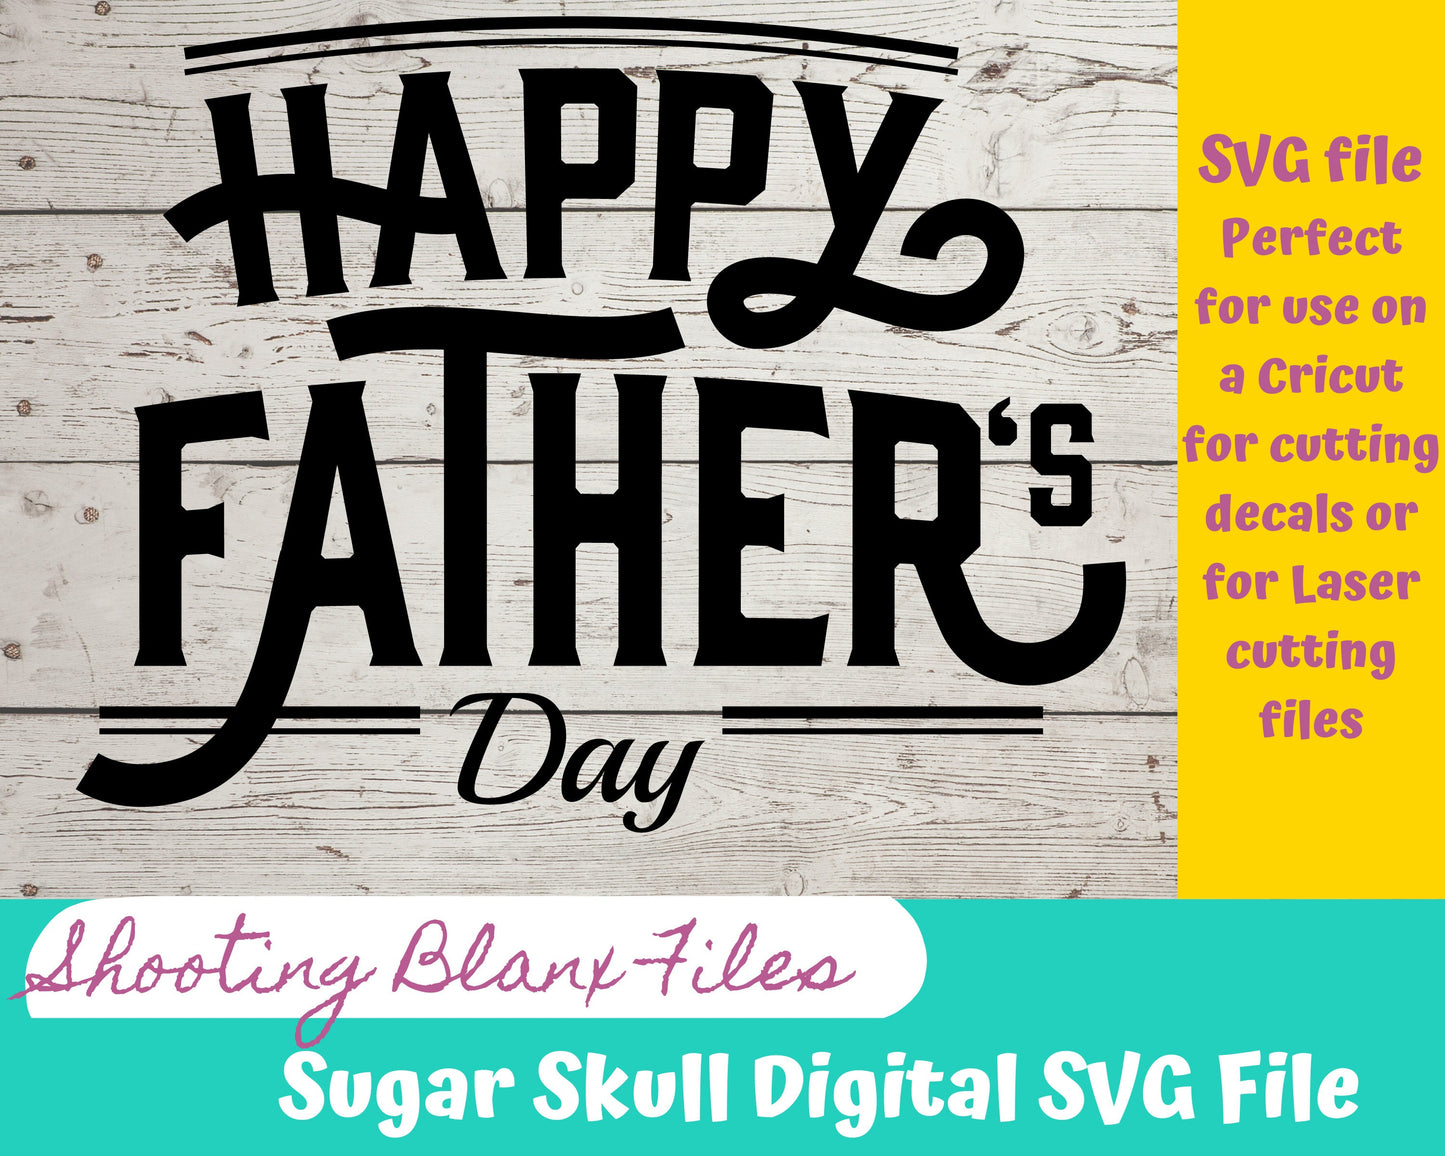 Father’s Day quote SVG file perfect for Cricut, Cameo, or Silhouette also great for laser engraving Glowforge , father, dad